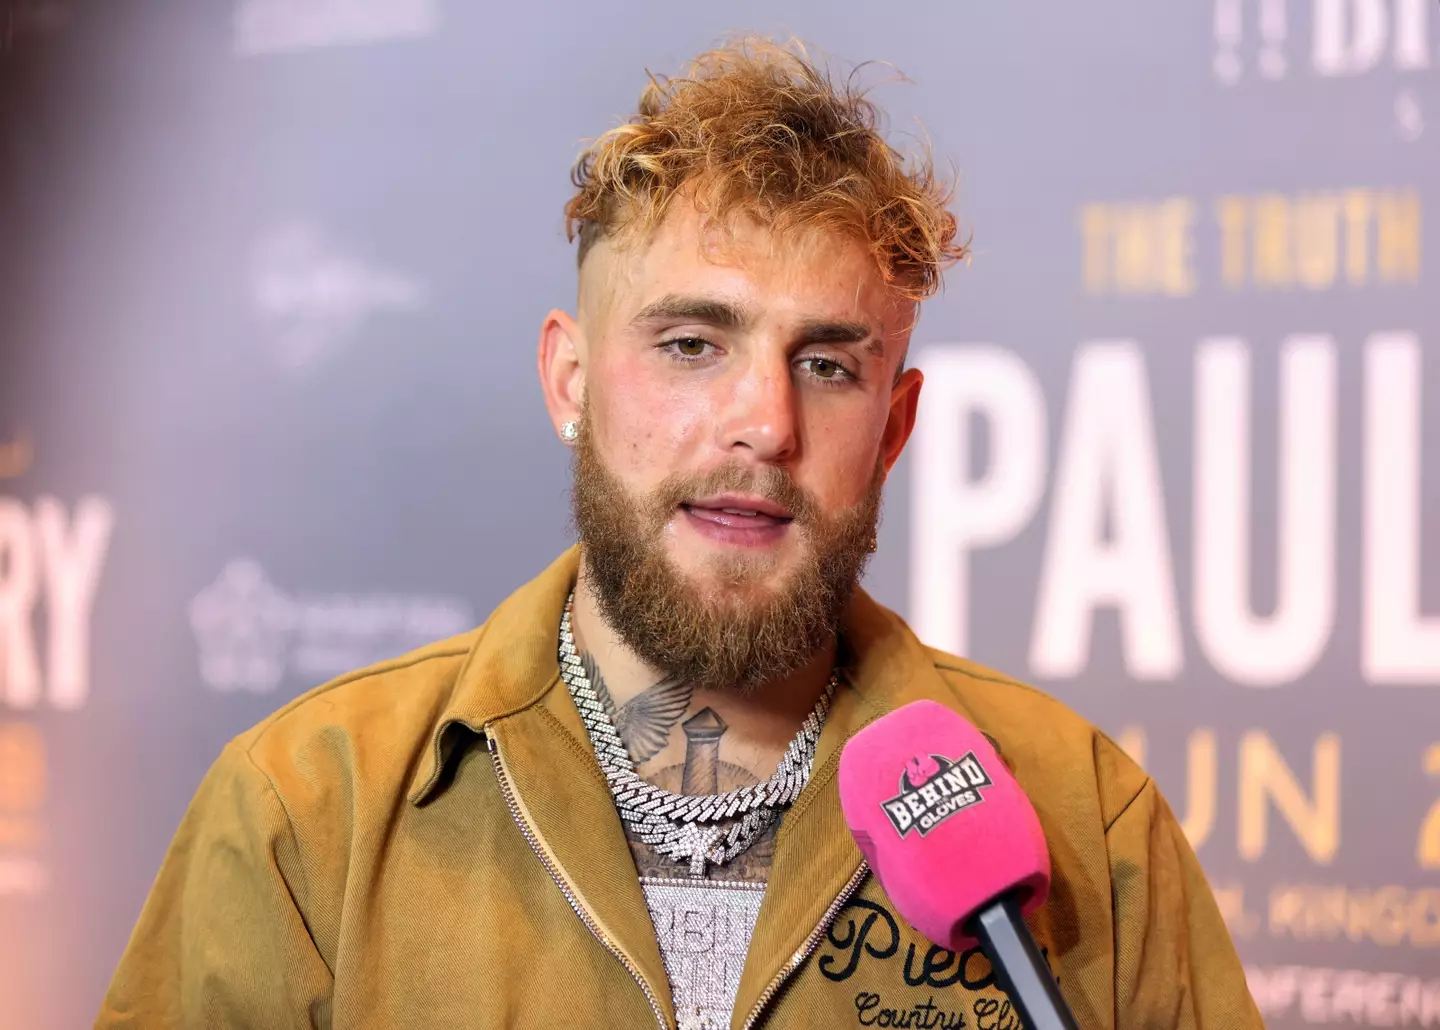 Jake Paul lost his fight to Tommy Fury in February.